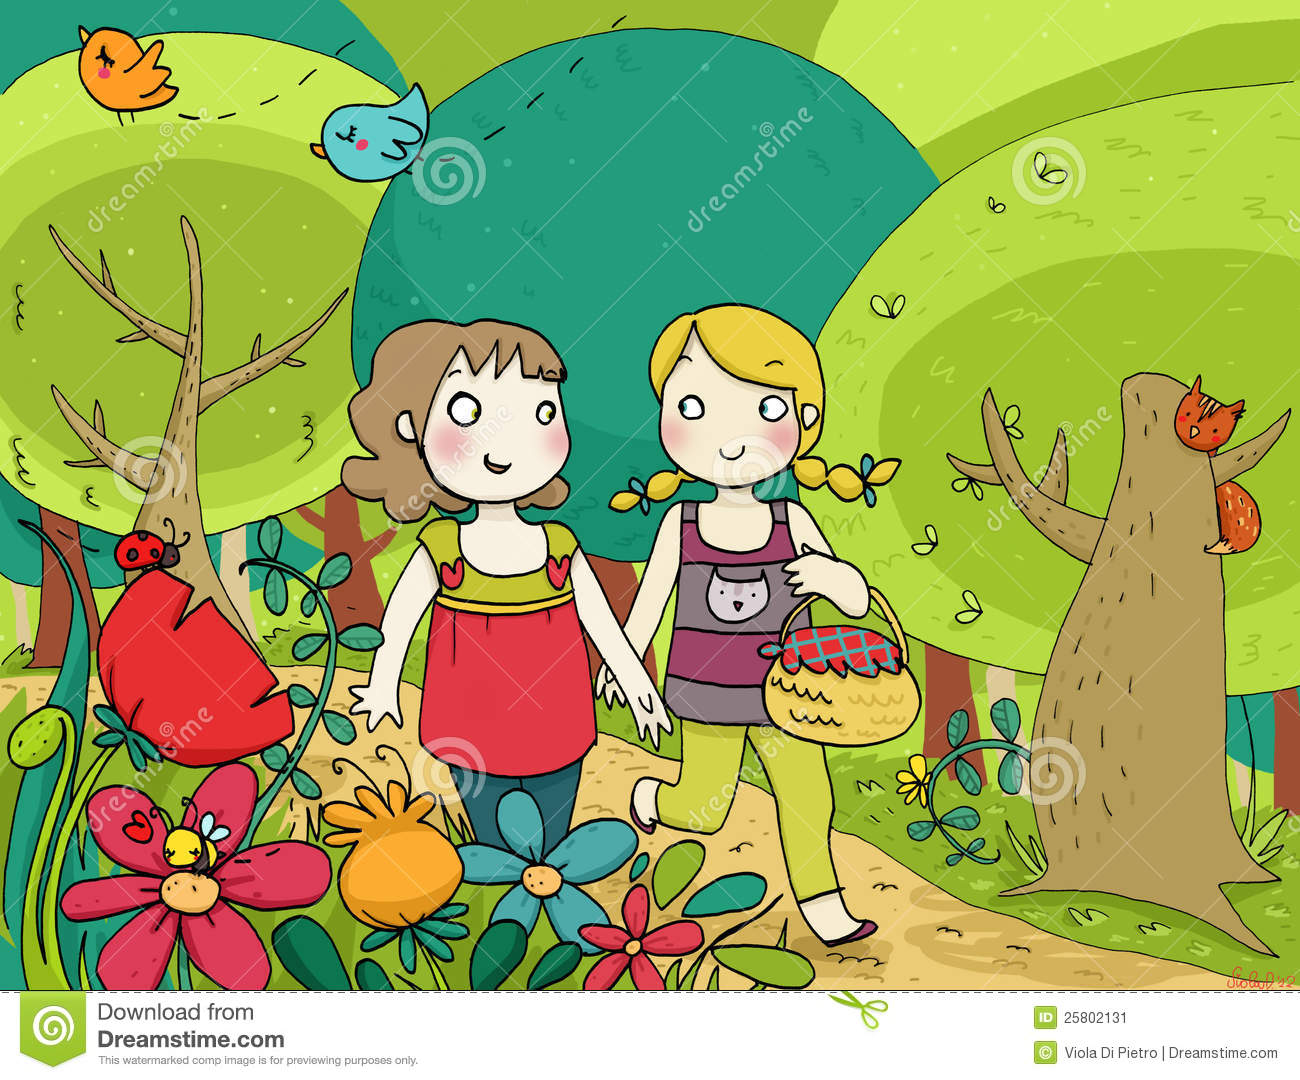 Two Happy Little Girls Walking Together In A Colorful Wood  Digital    